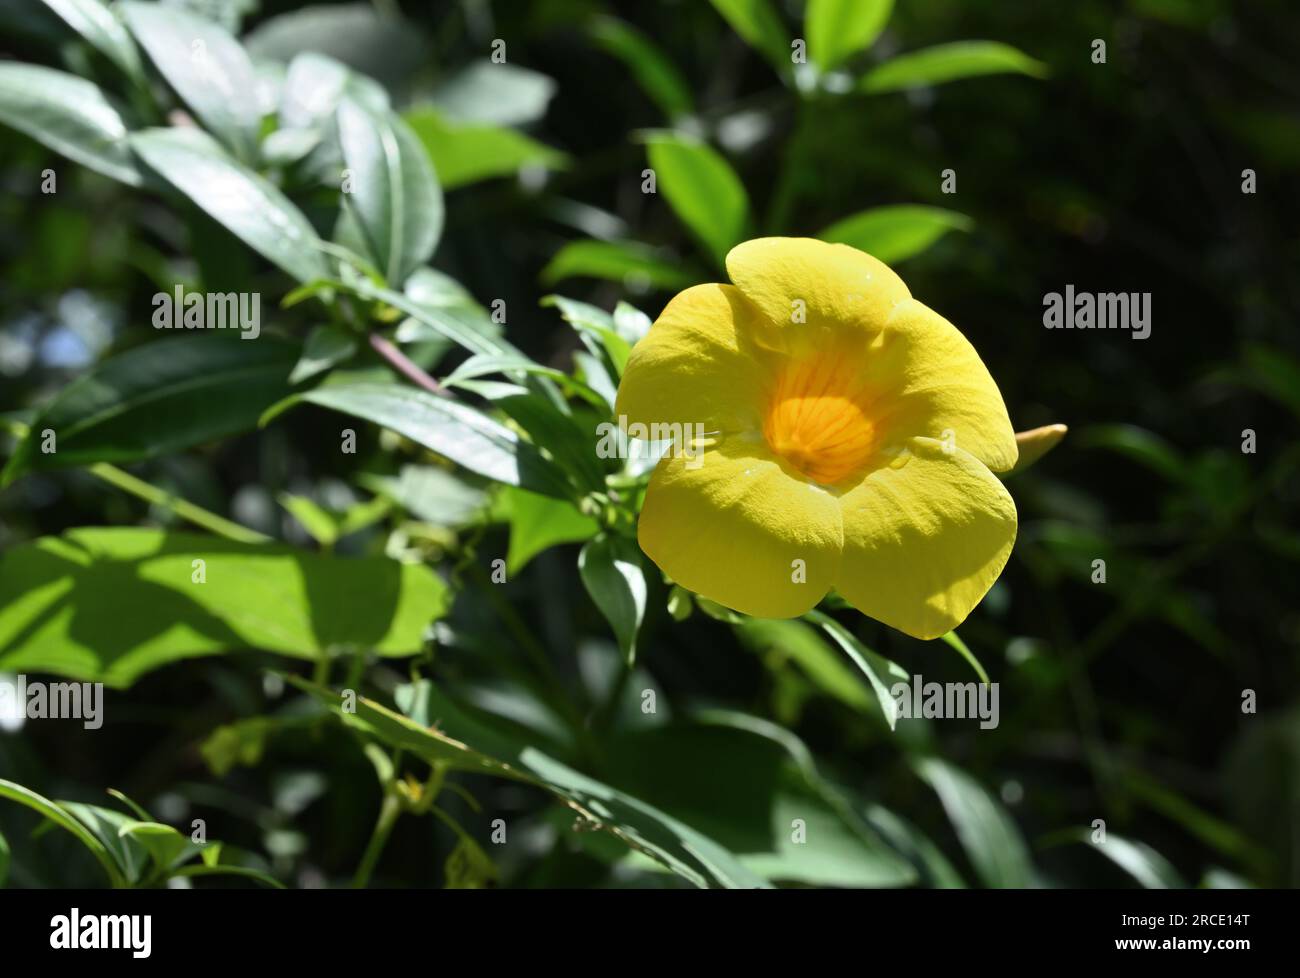 A yellow color flower bloomed on the yellow Allamanda (Allamanda Cathartica) vine, the flower is in the direct sunlight Stock Photo